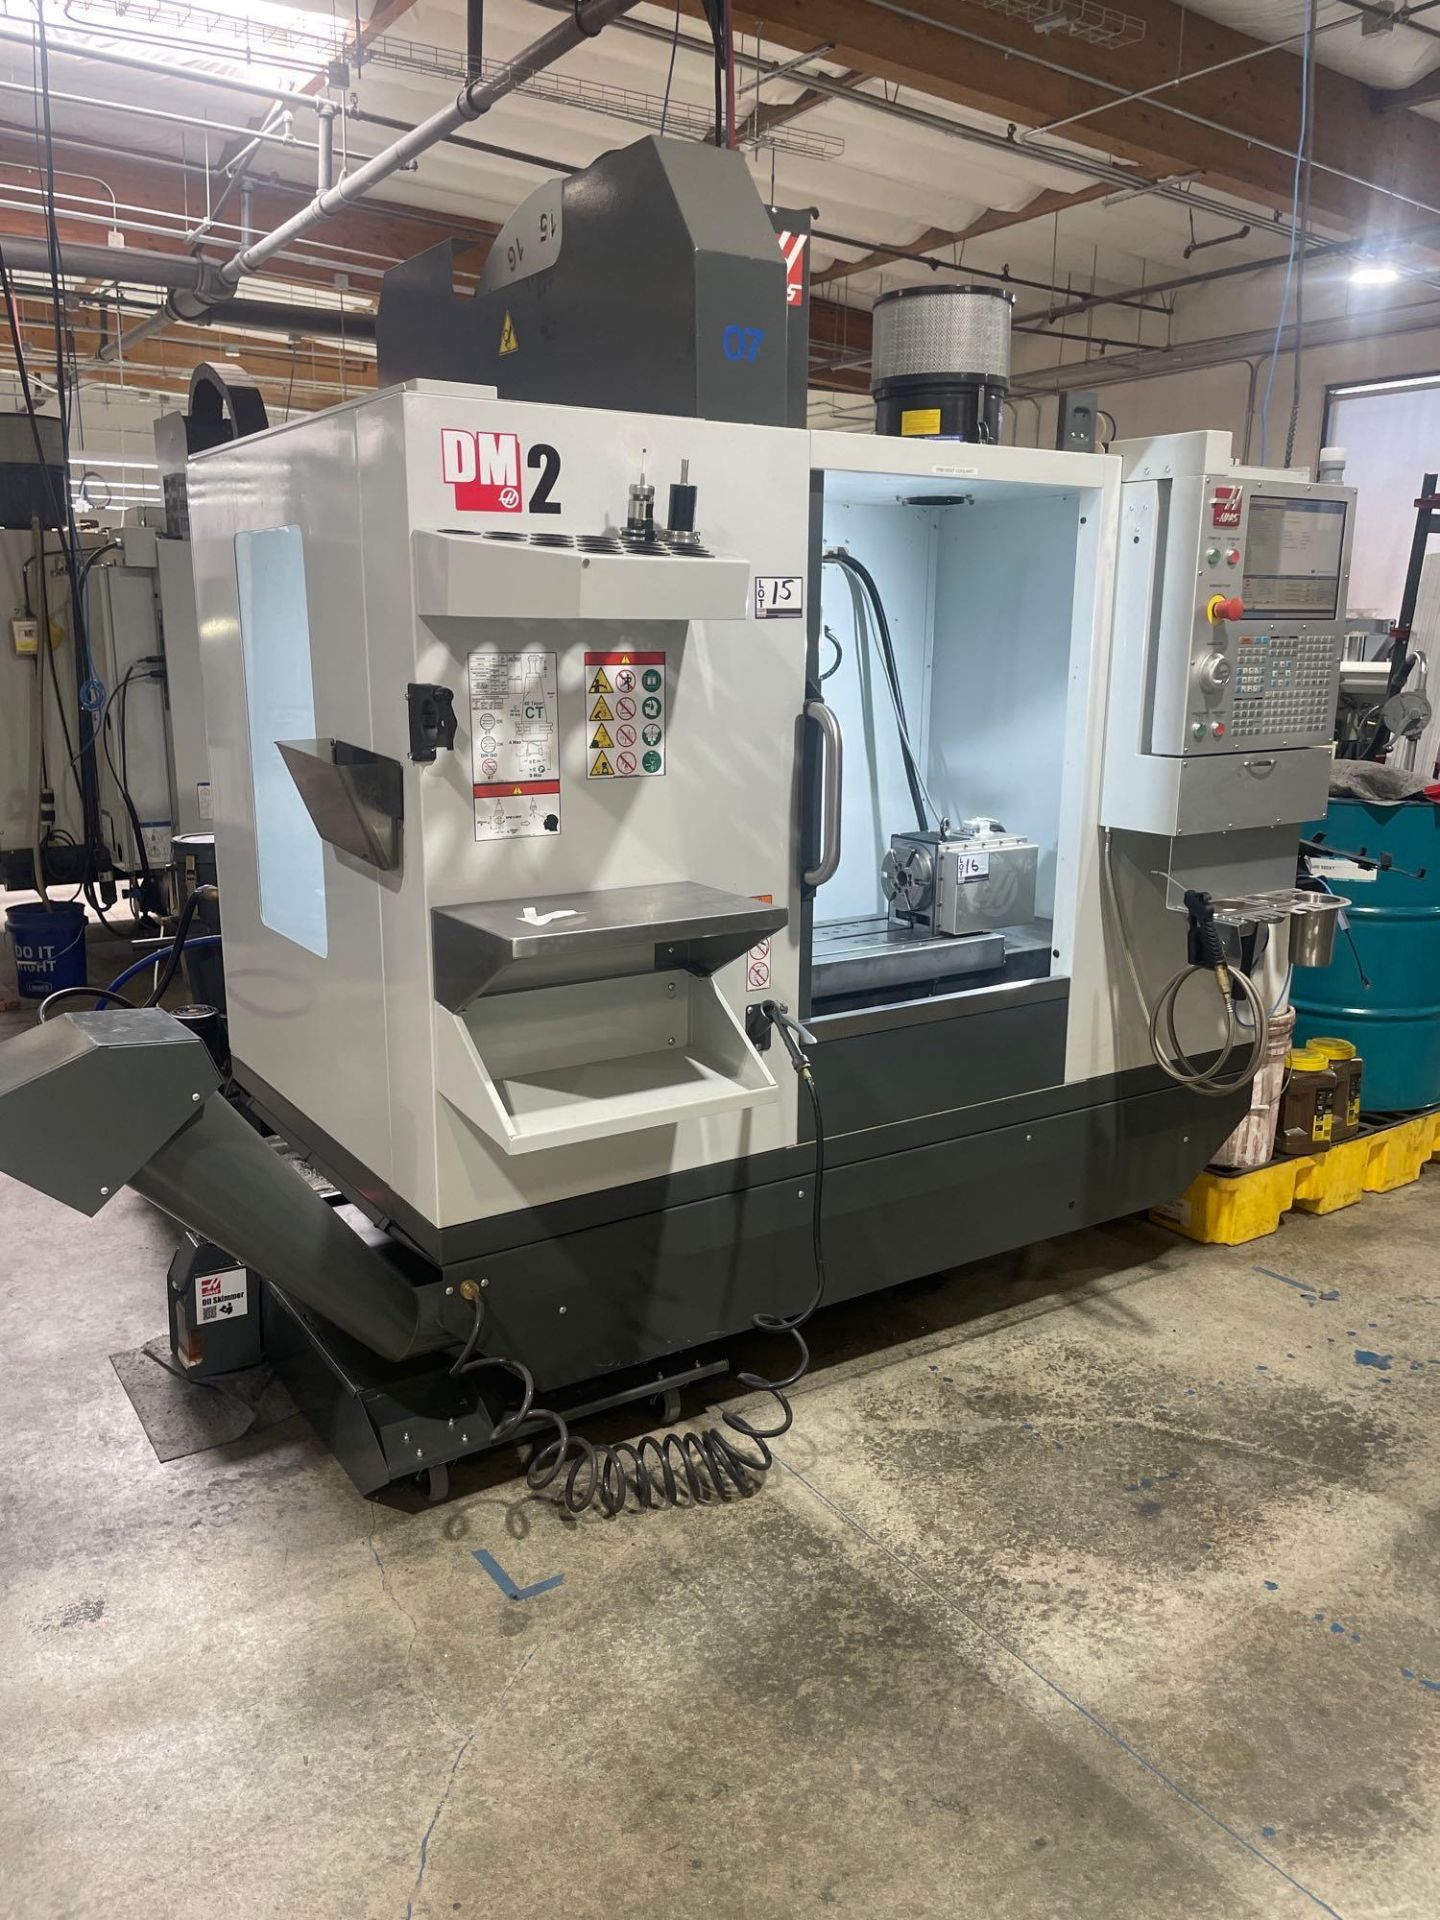 Haas DM-2, 28” x 16” x 15.5” Travels, CT 40, 18+1 SMTC, CTS, WIPS, as New as 2021 - Image 4 of 12